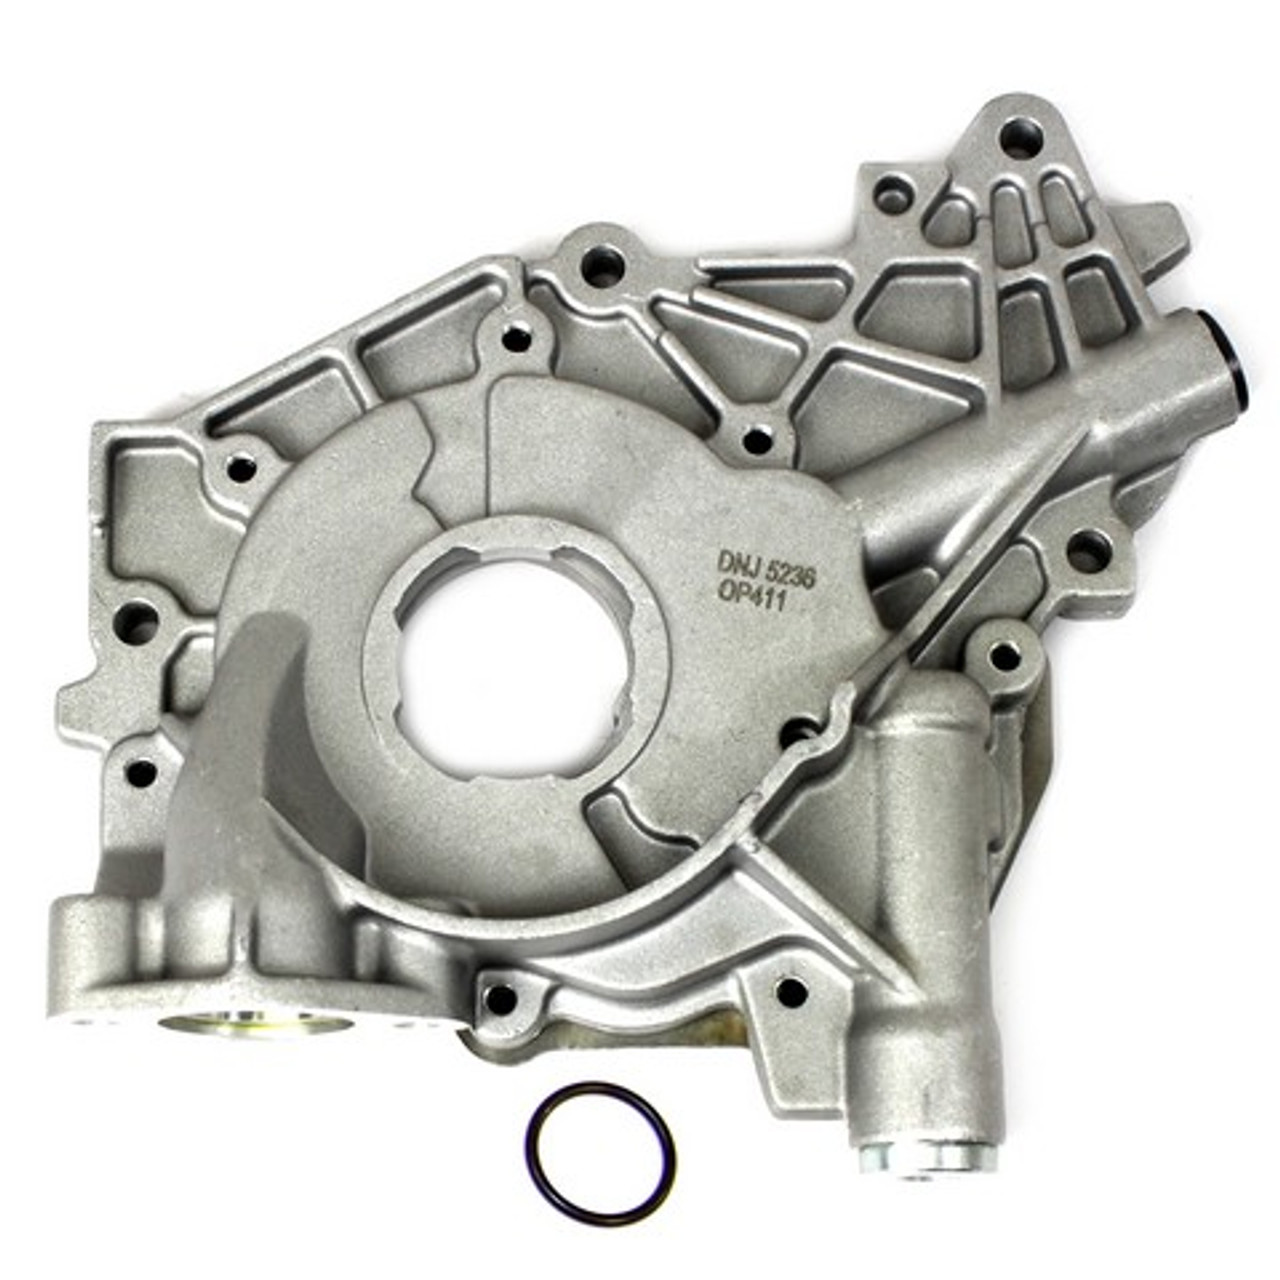 Oil Pump 3.0L 2005 Ford Freestyle - OP411.16